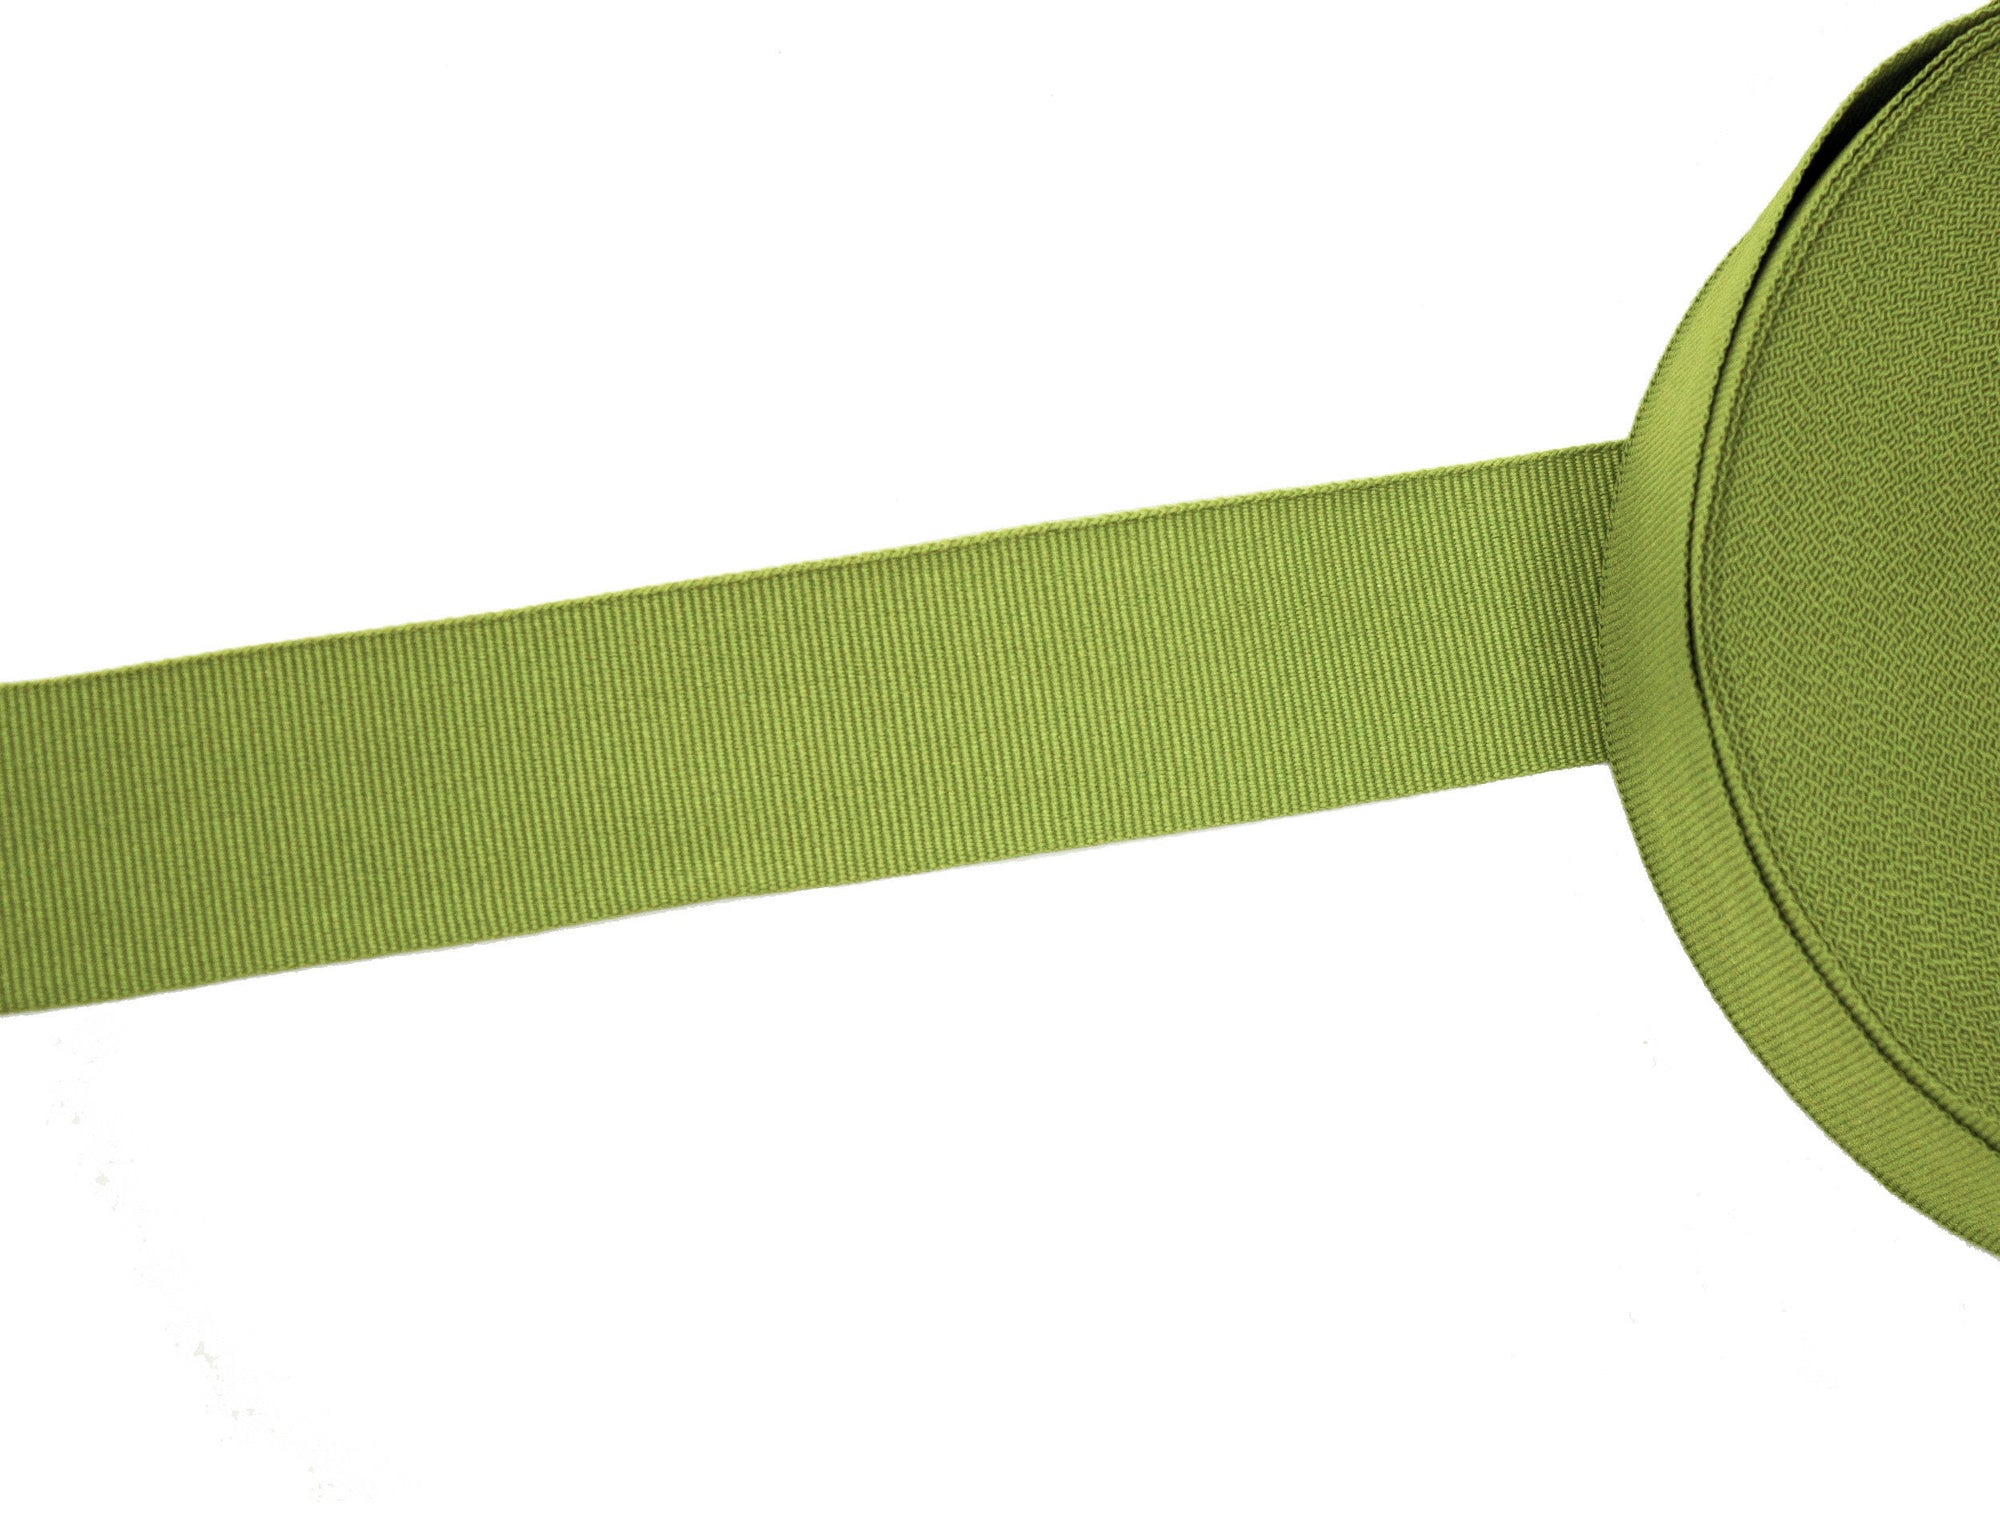 Vintage Grosgrain Ribbon Dark Chartreuse Green Measures 32 mm Wide - Sold by the Yard